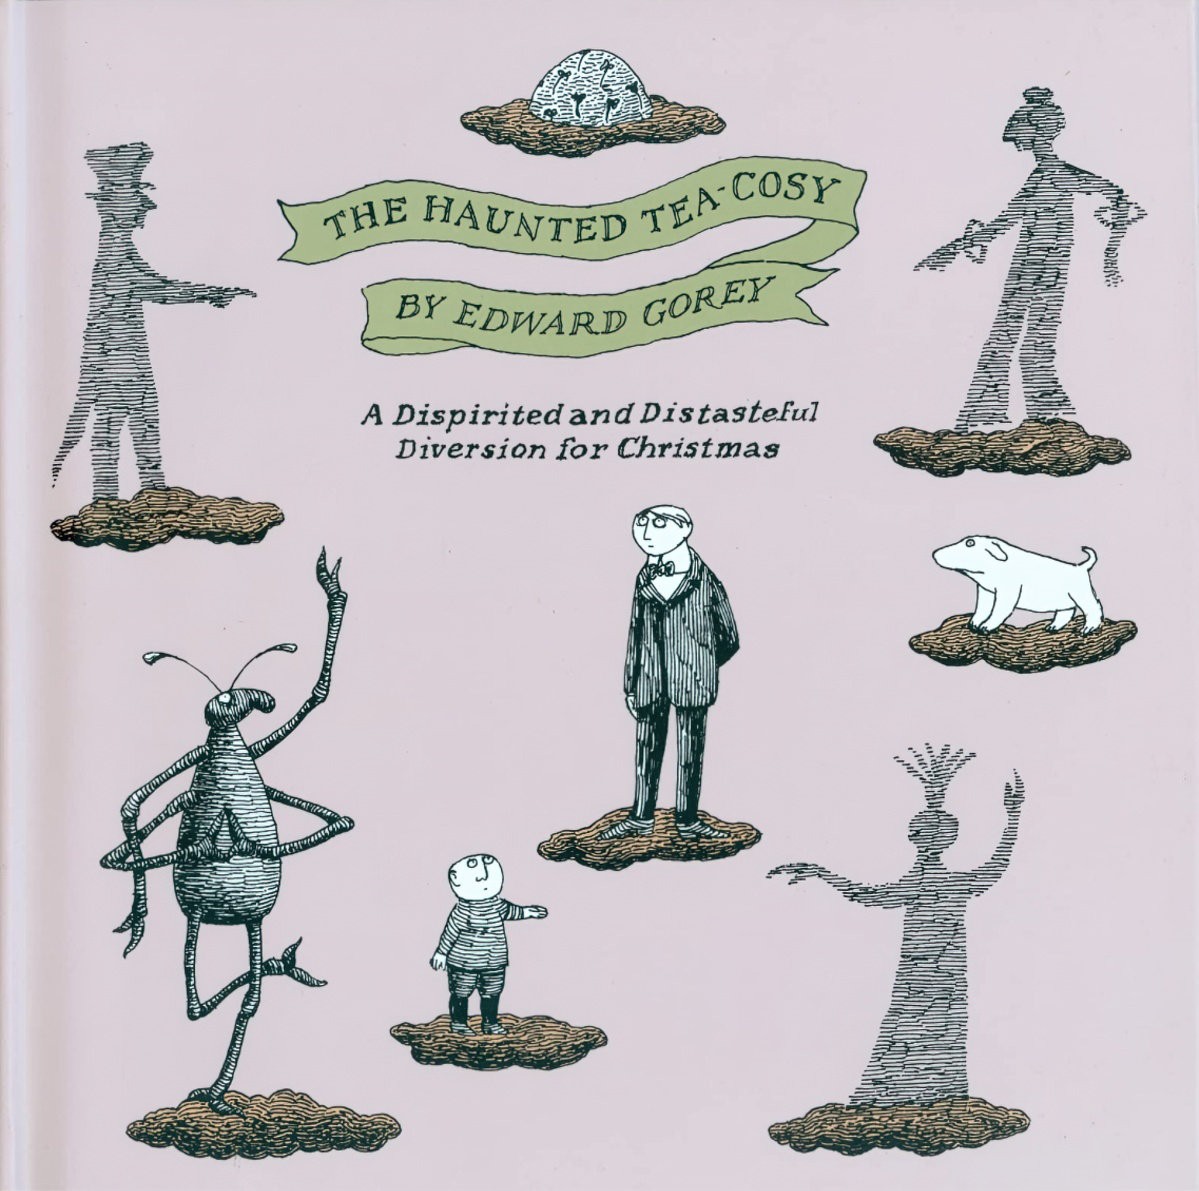 The Haunted Tea-Cosy by Edward Gorey Analysis